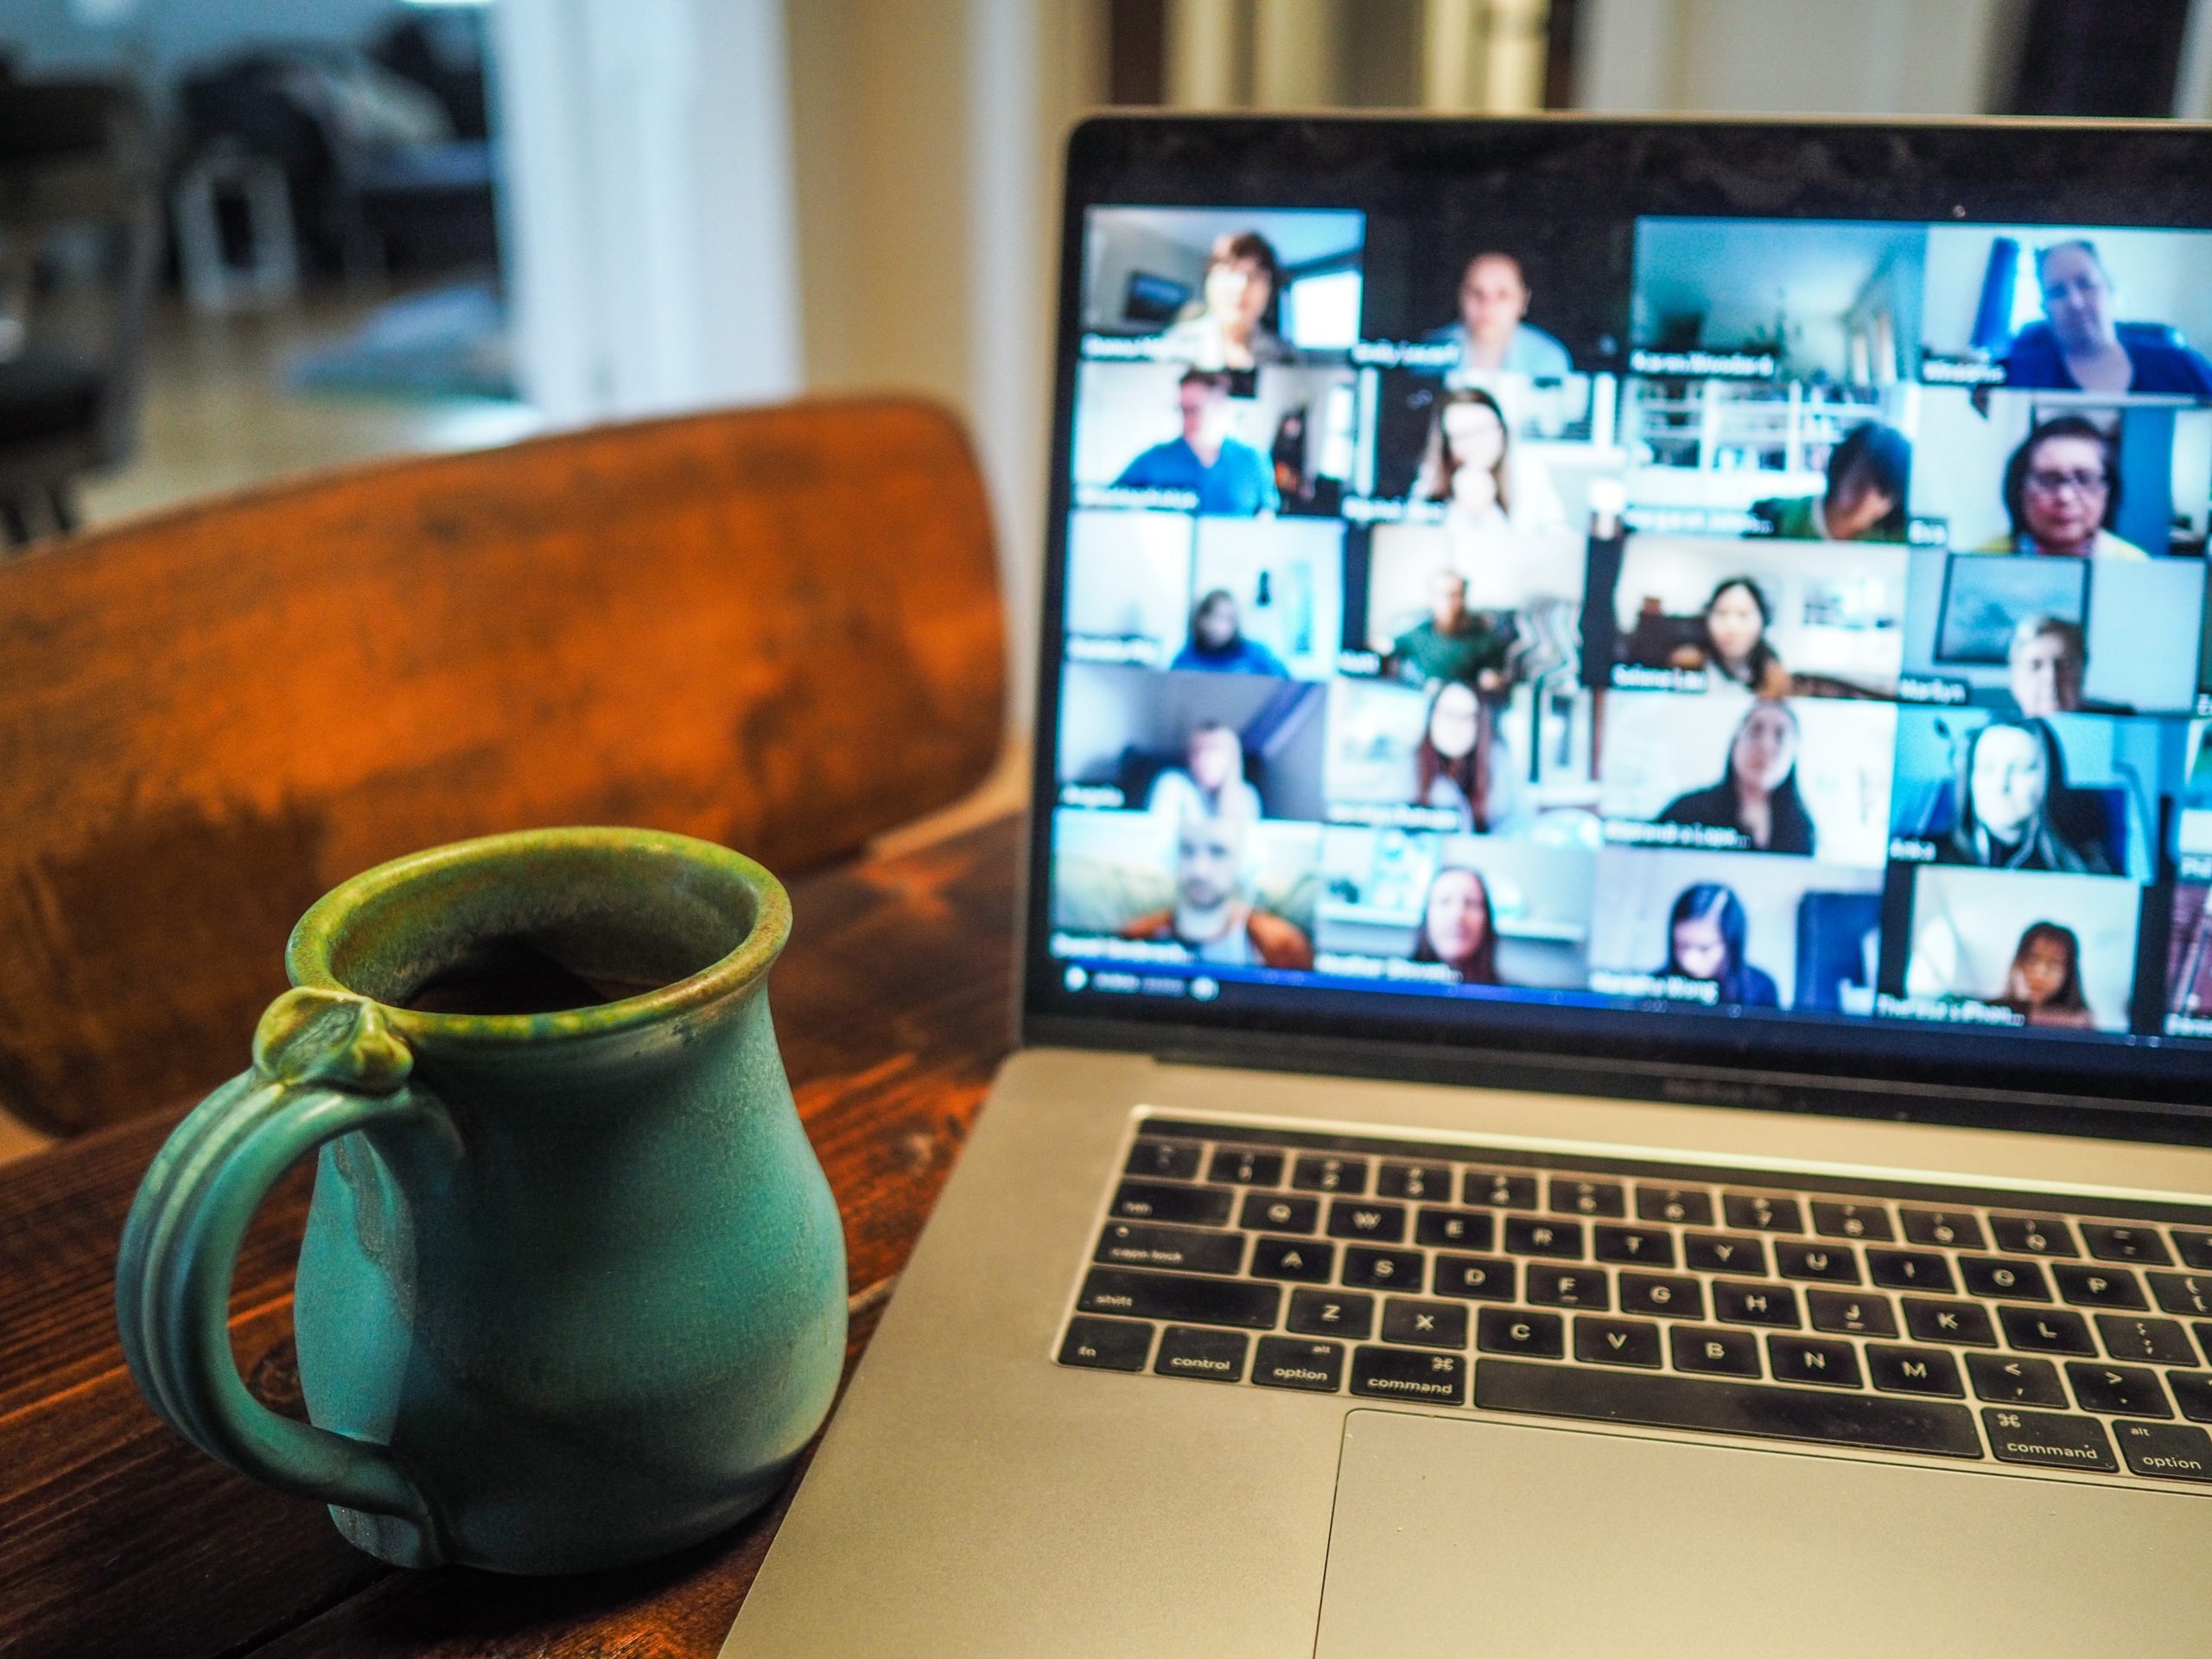 Several people can be seen on a laptop screen, participating in an online meeting, while a green mug of coffee sits to the left of the laptop.